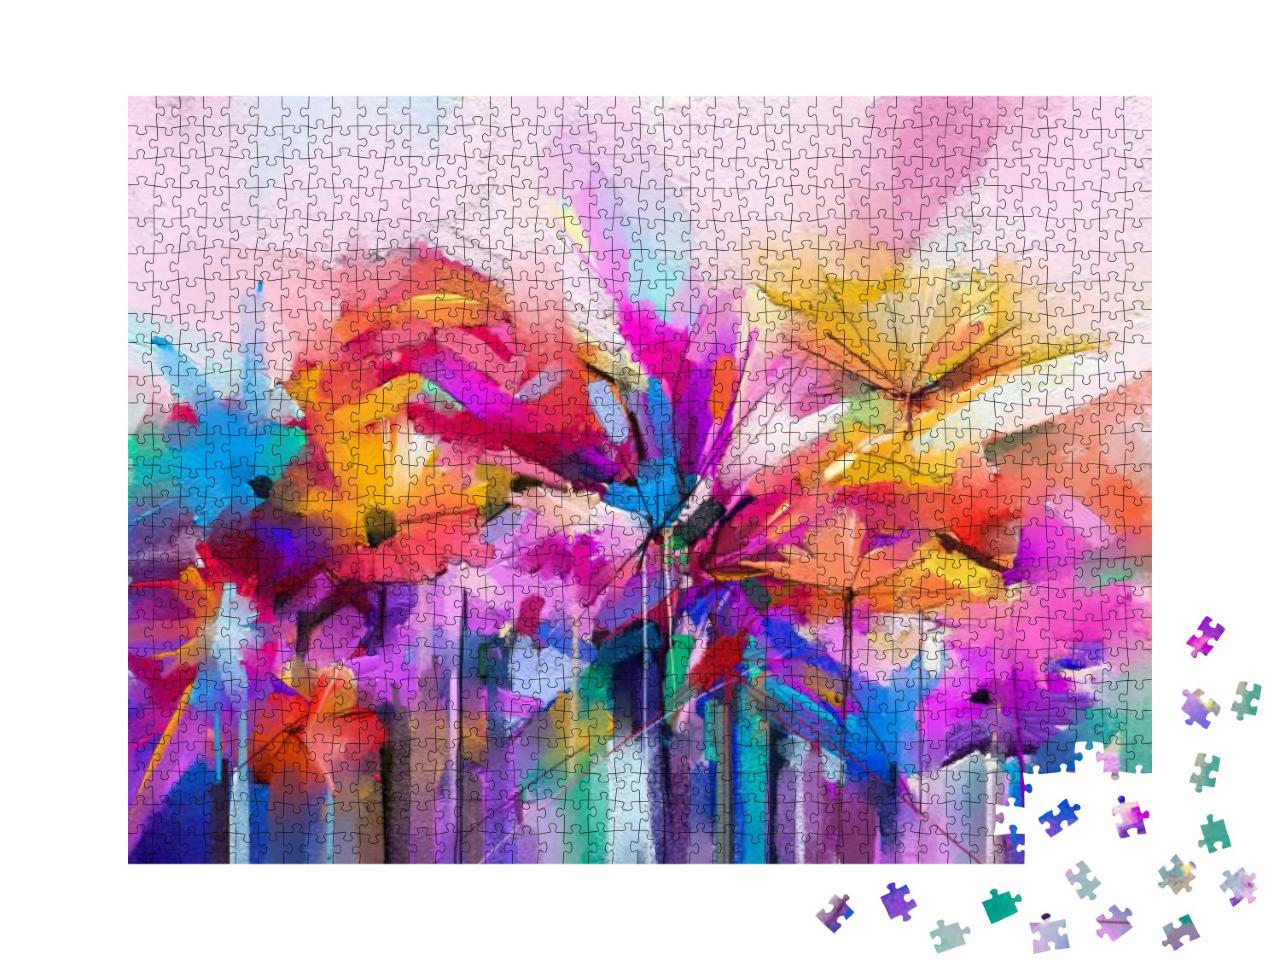 Abstract Colorful Oil, Acrylic Painting of Spring Flower... Jigsaw Puzzle with 1000 pieces